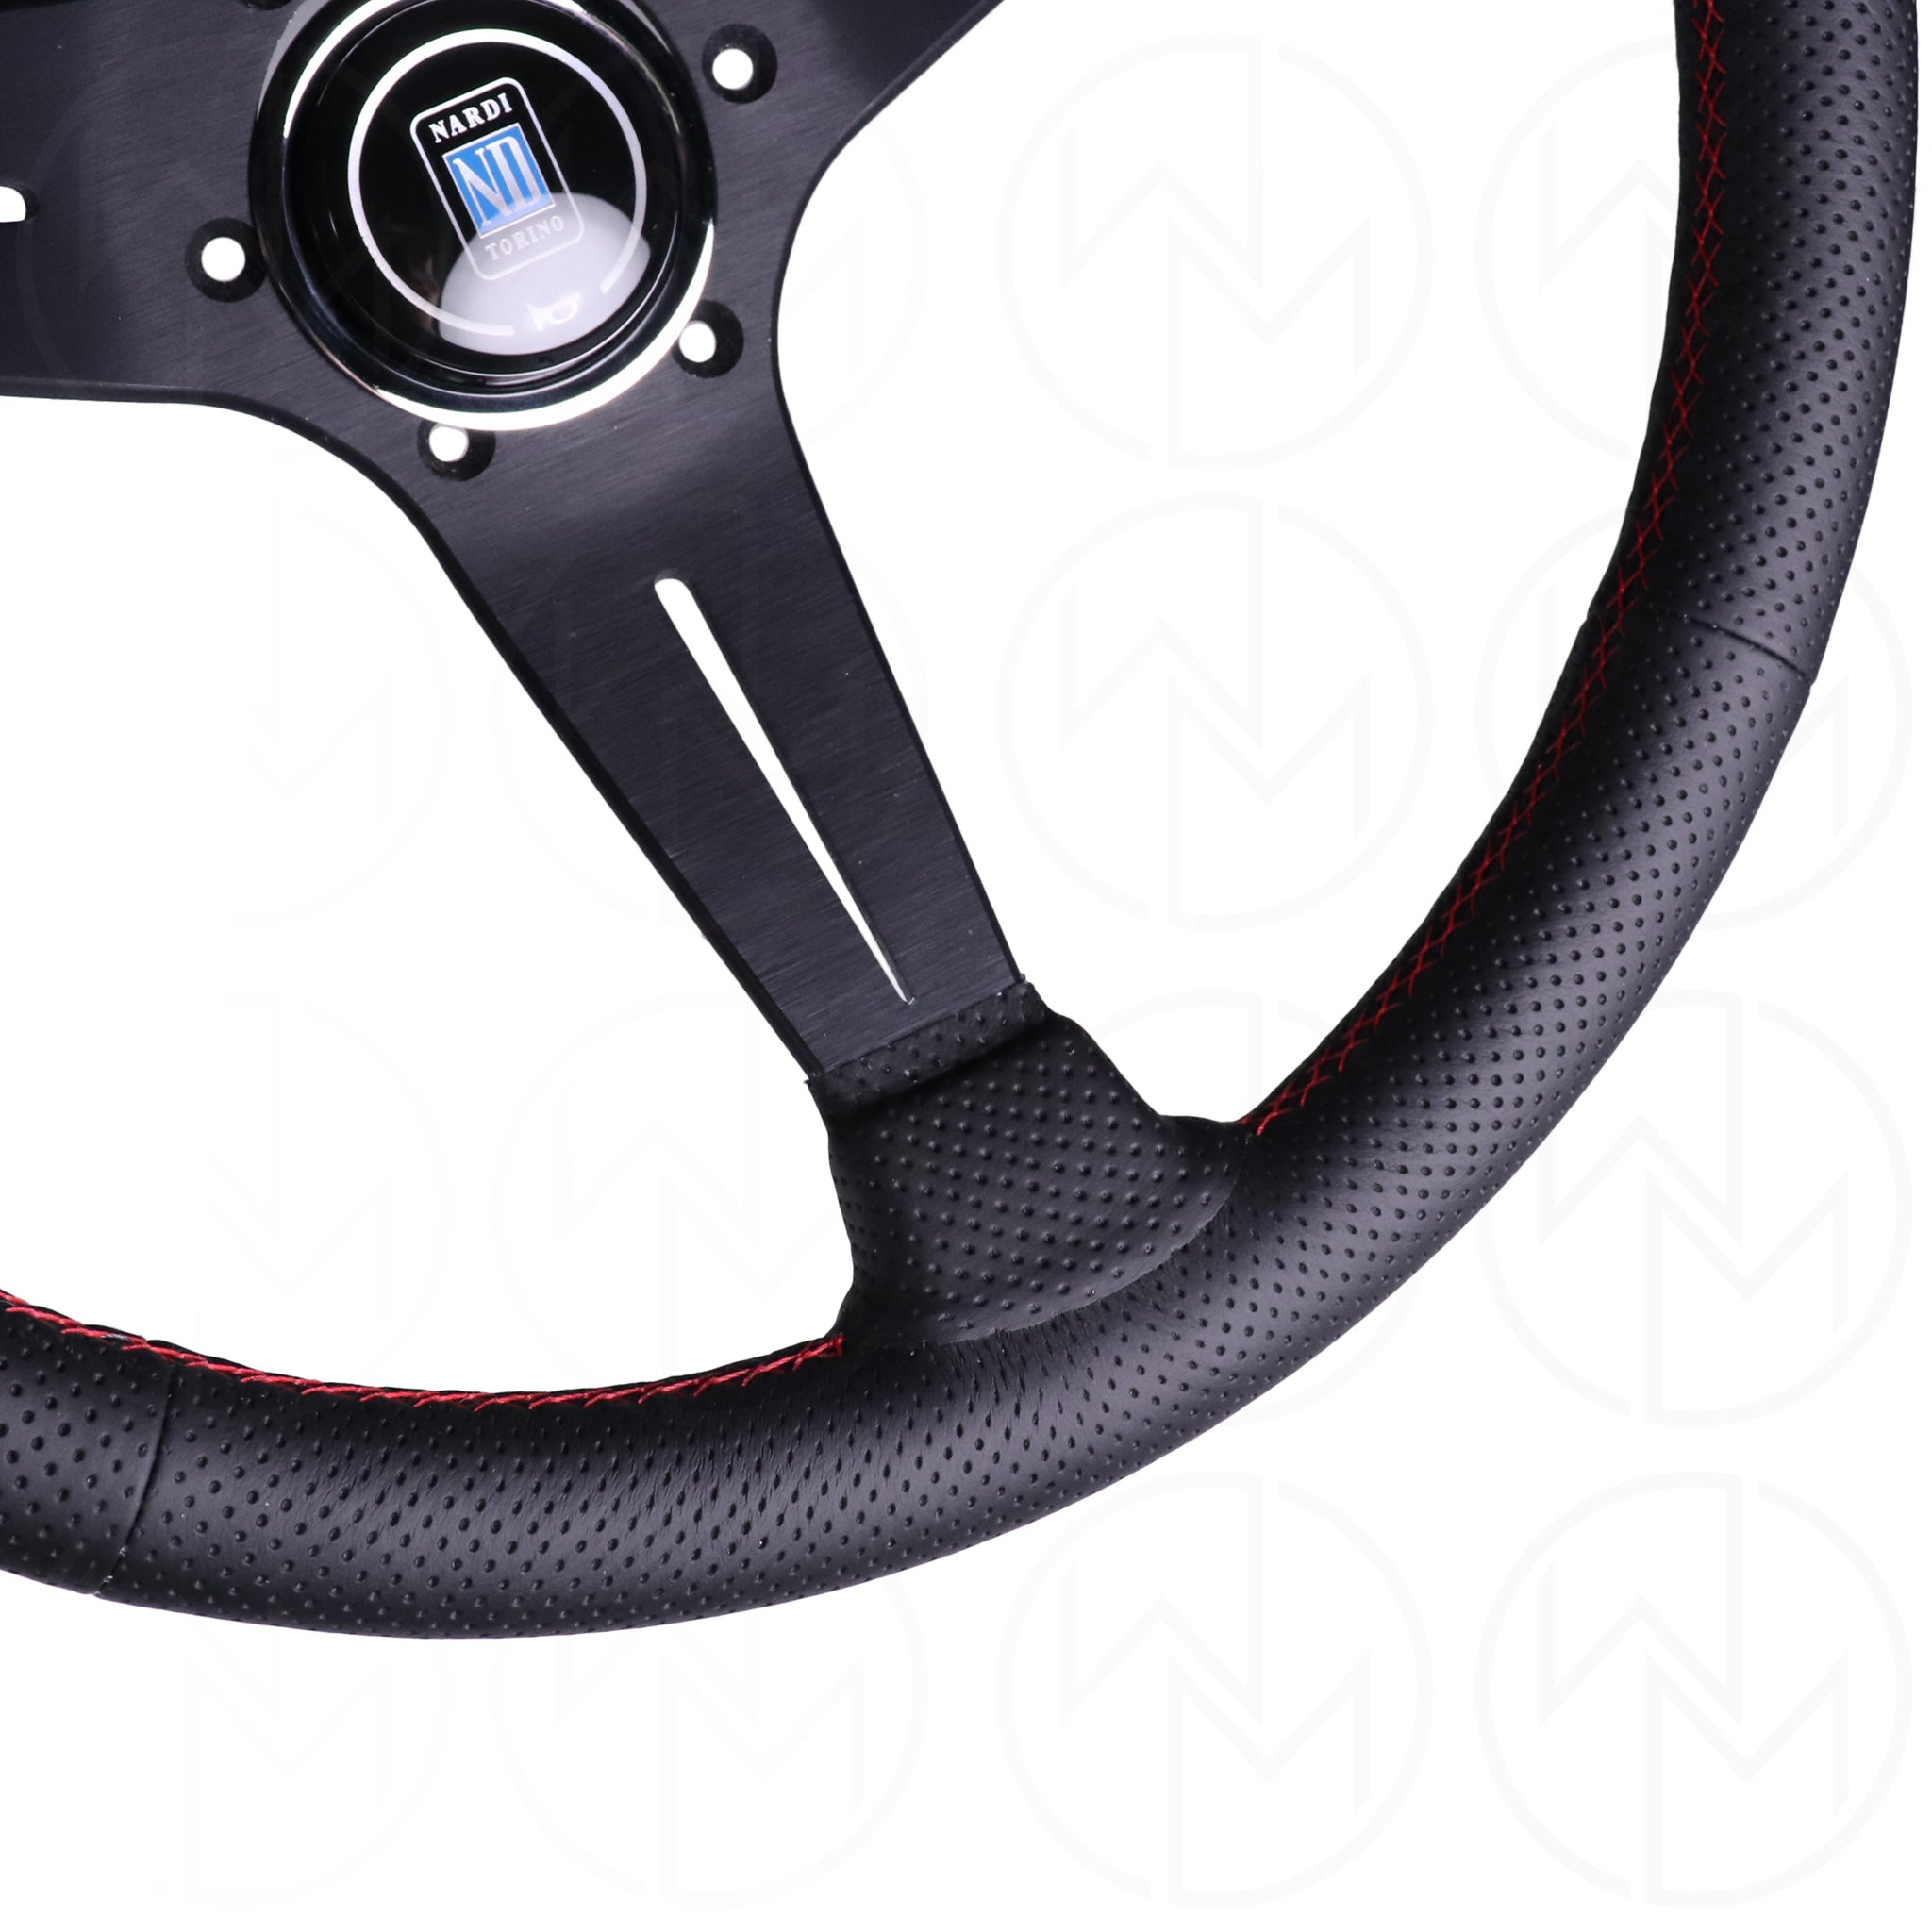 Nardi Sport Rally Deep Corn Steering Wheel - 350mm Perforated Leather w/Red Stitch